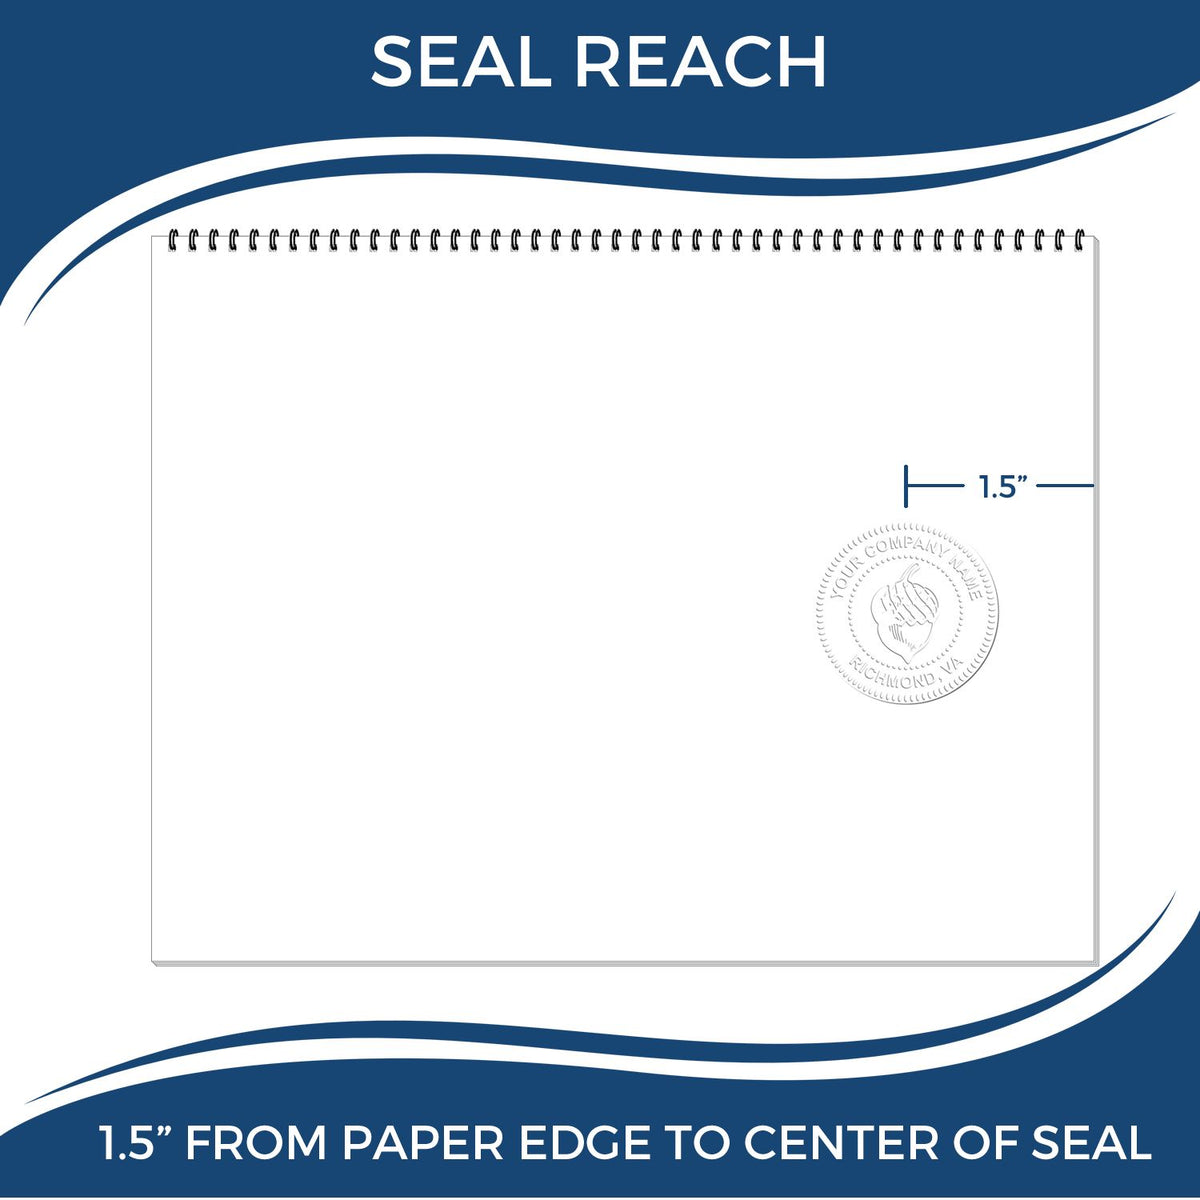 An infographic showing the seal reach which is represented by a ruler and a miniature seal image of the Handheld Iowa Professional Engineer Embosser